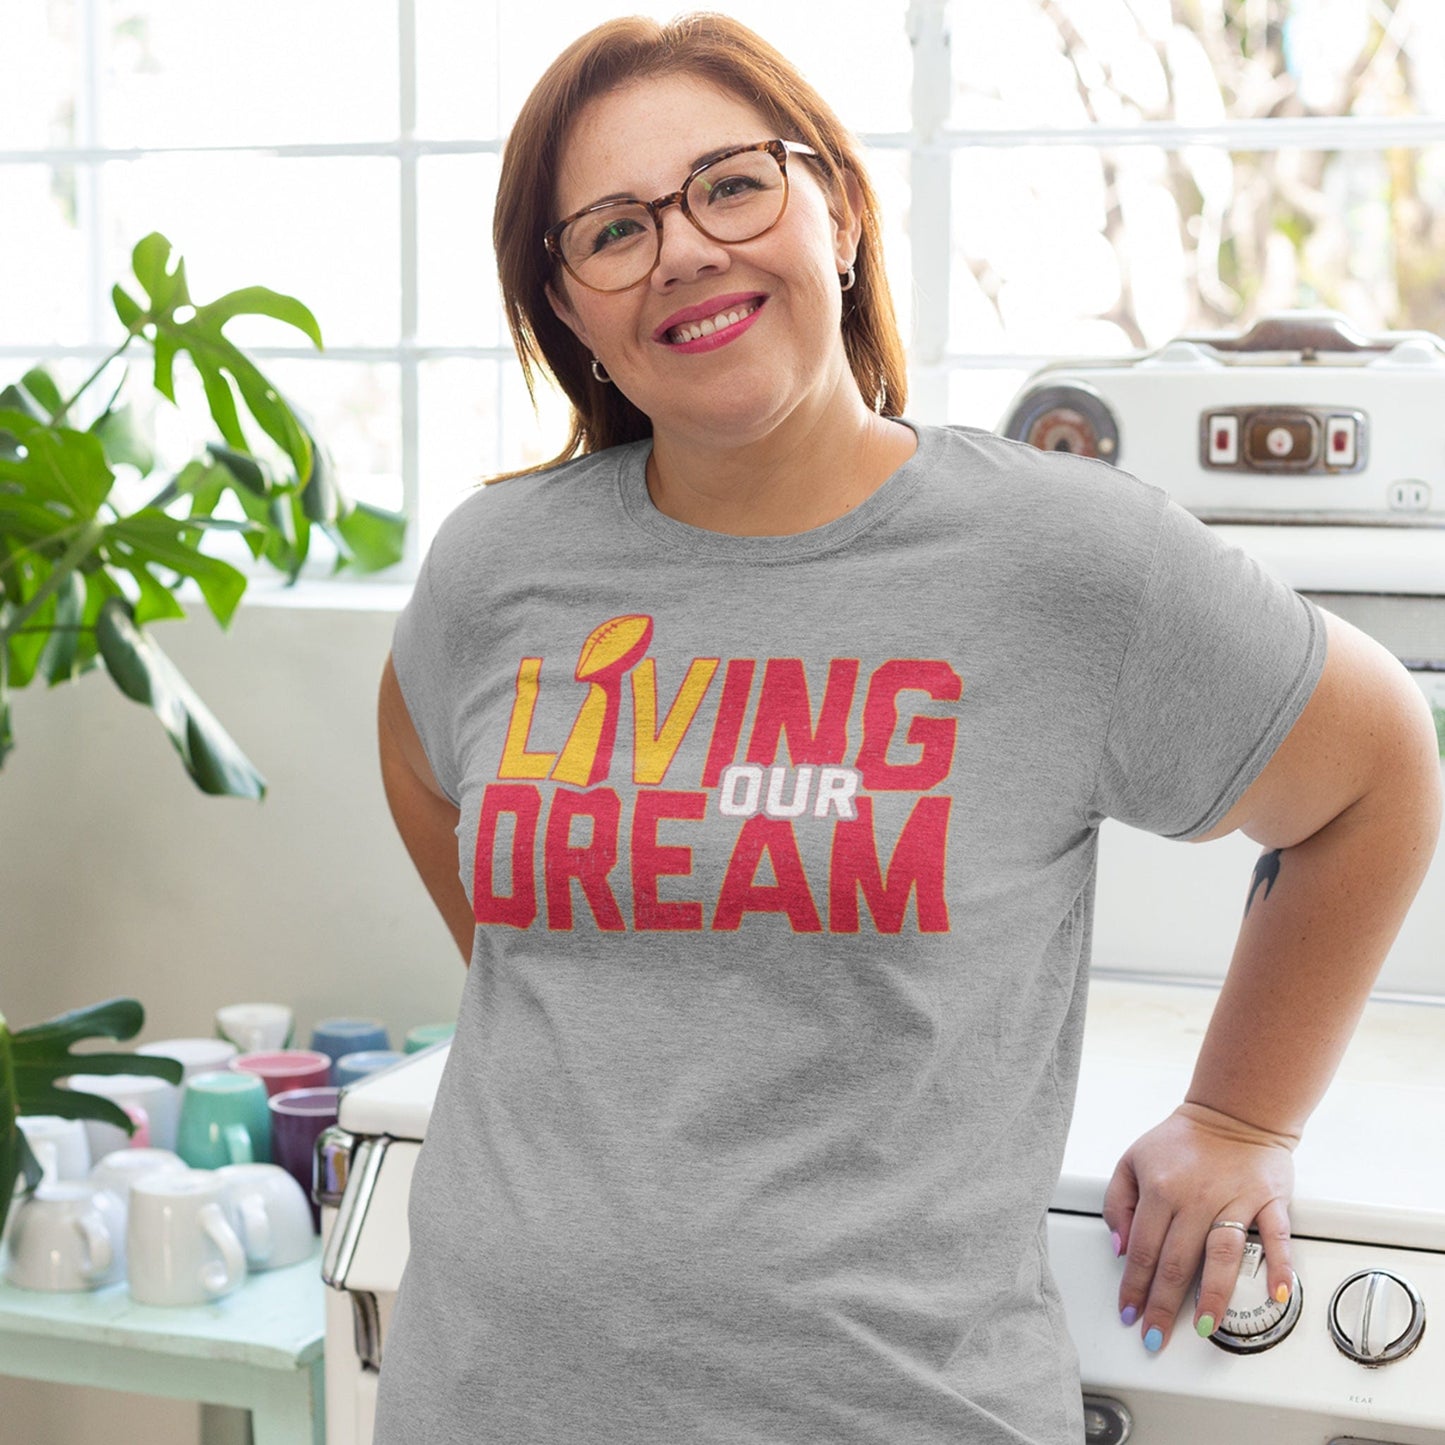 KC Swag Kansas City Chiefs red/yellow/white L(Lombardi trophy)IVING OUR DREAM on athletic heather grey t-shirt worn by female model in bright kitchen